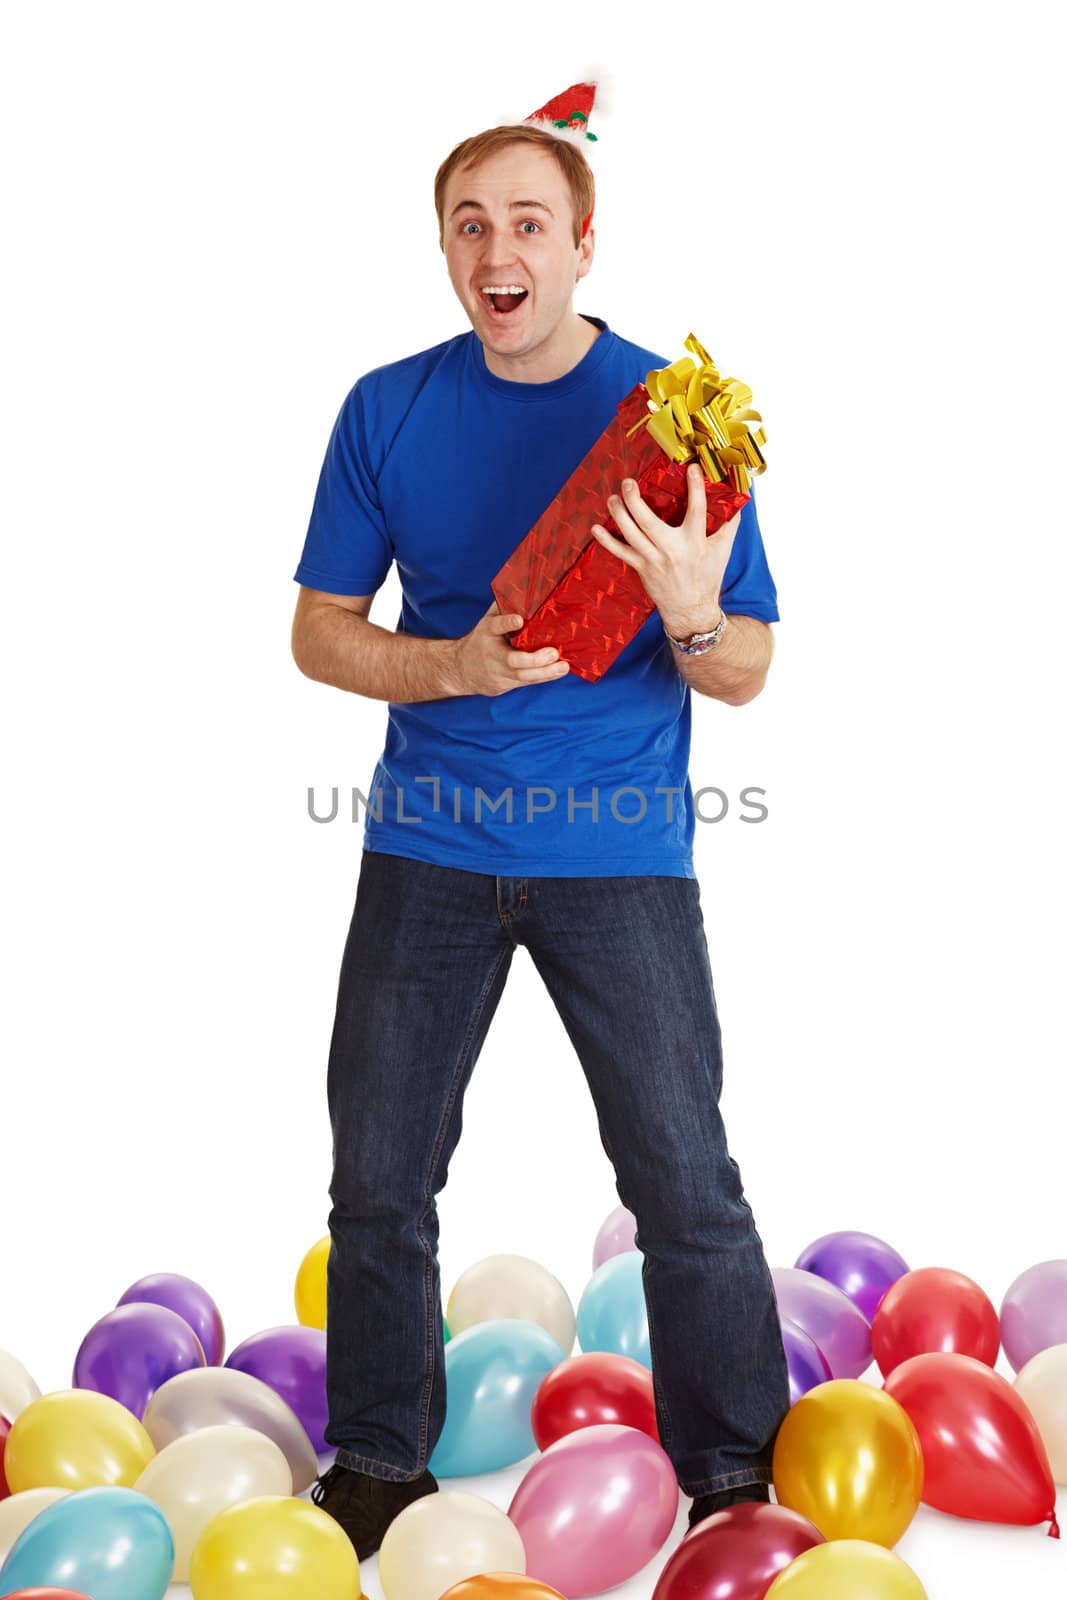 The cheerful man with a New Year's gift in hands isolated on a white background